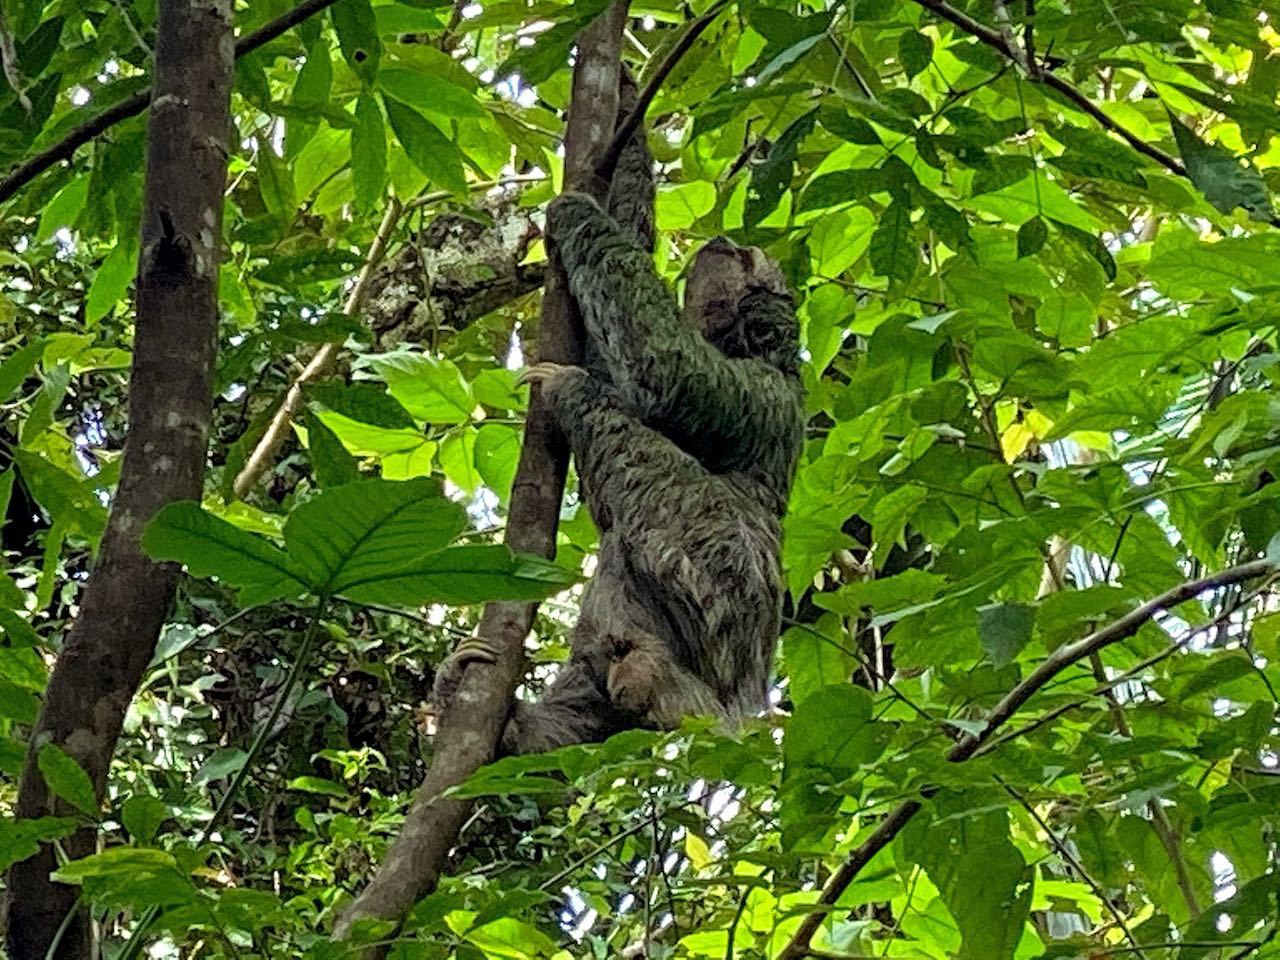 sloth in a tree in costa rica national park